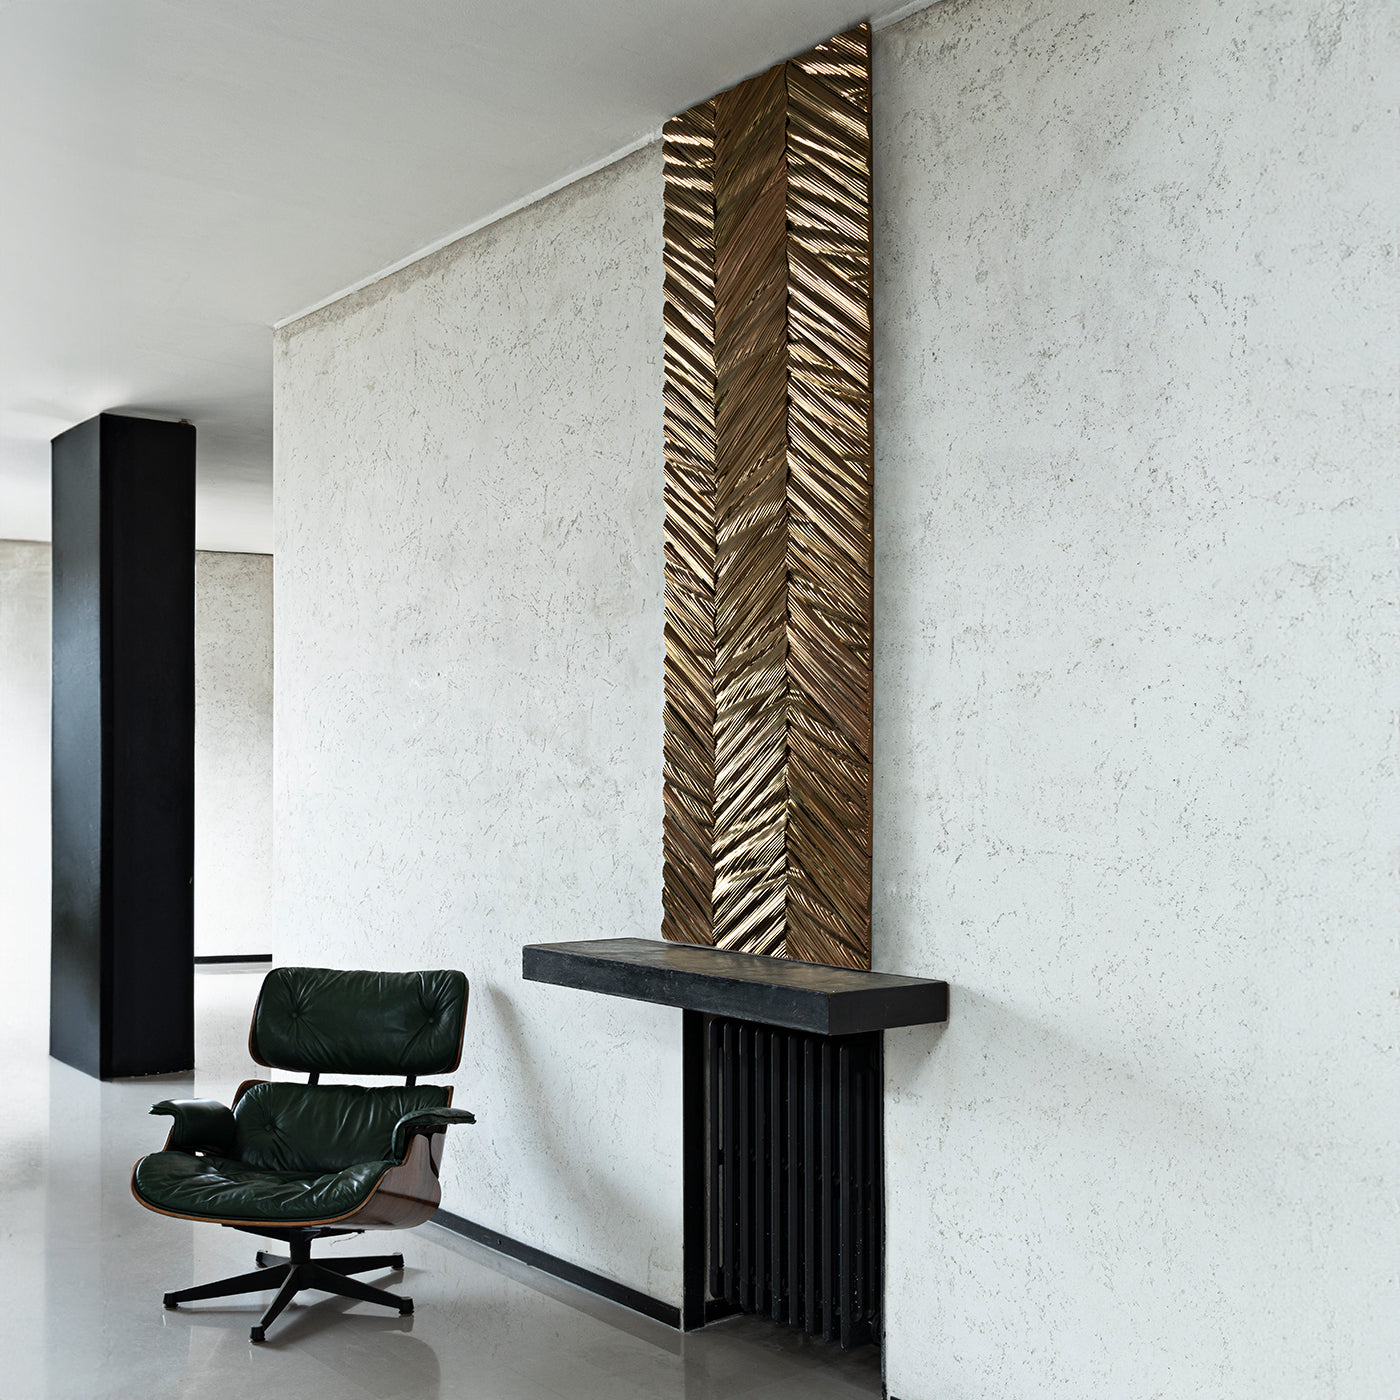 Calipso Bronzed Wall Covering by Giacomo Totti - Alternative view 2